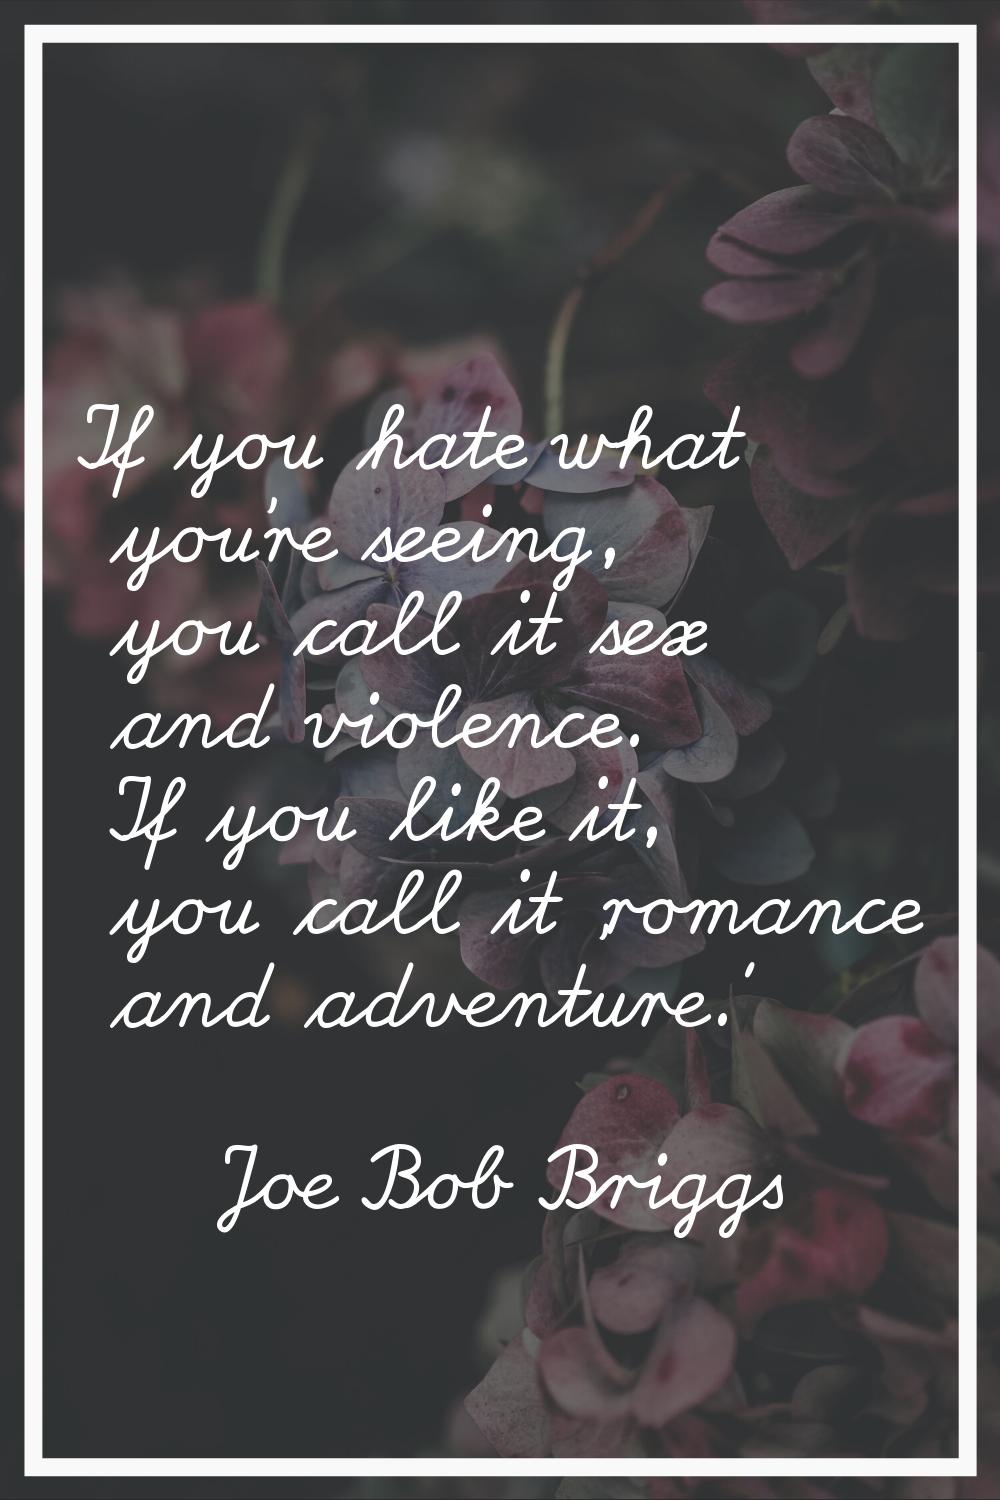 If you hate what you're seeing, you call it sex and violence. If you like it, you call it 'romance 